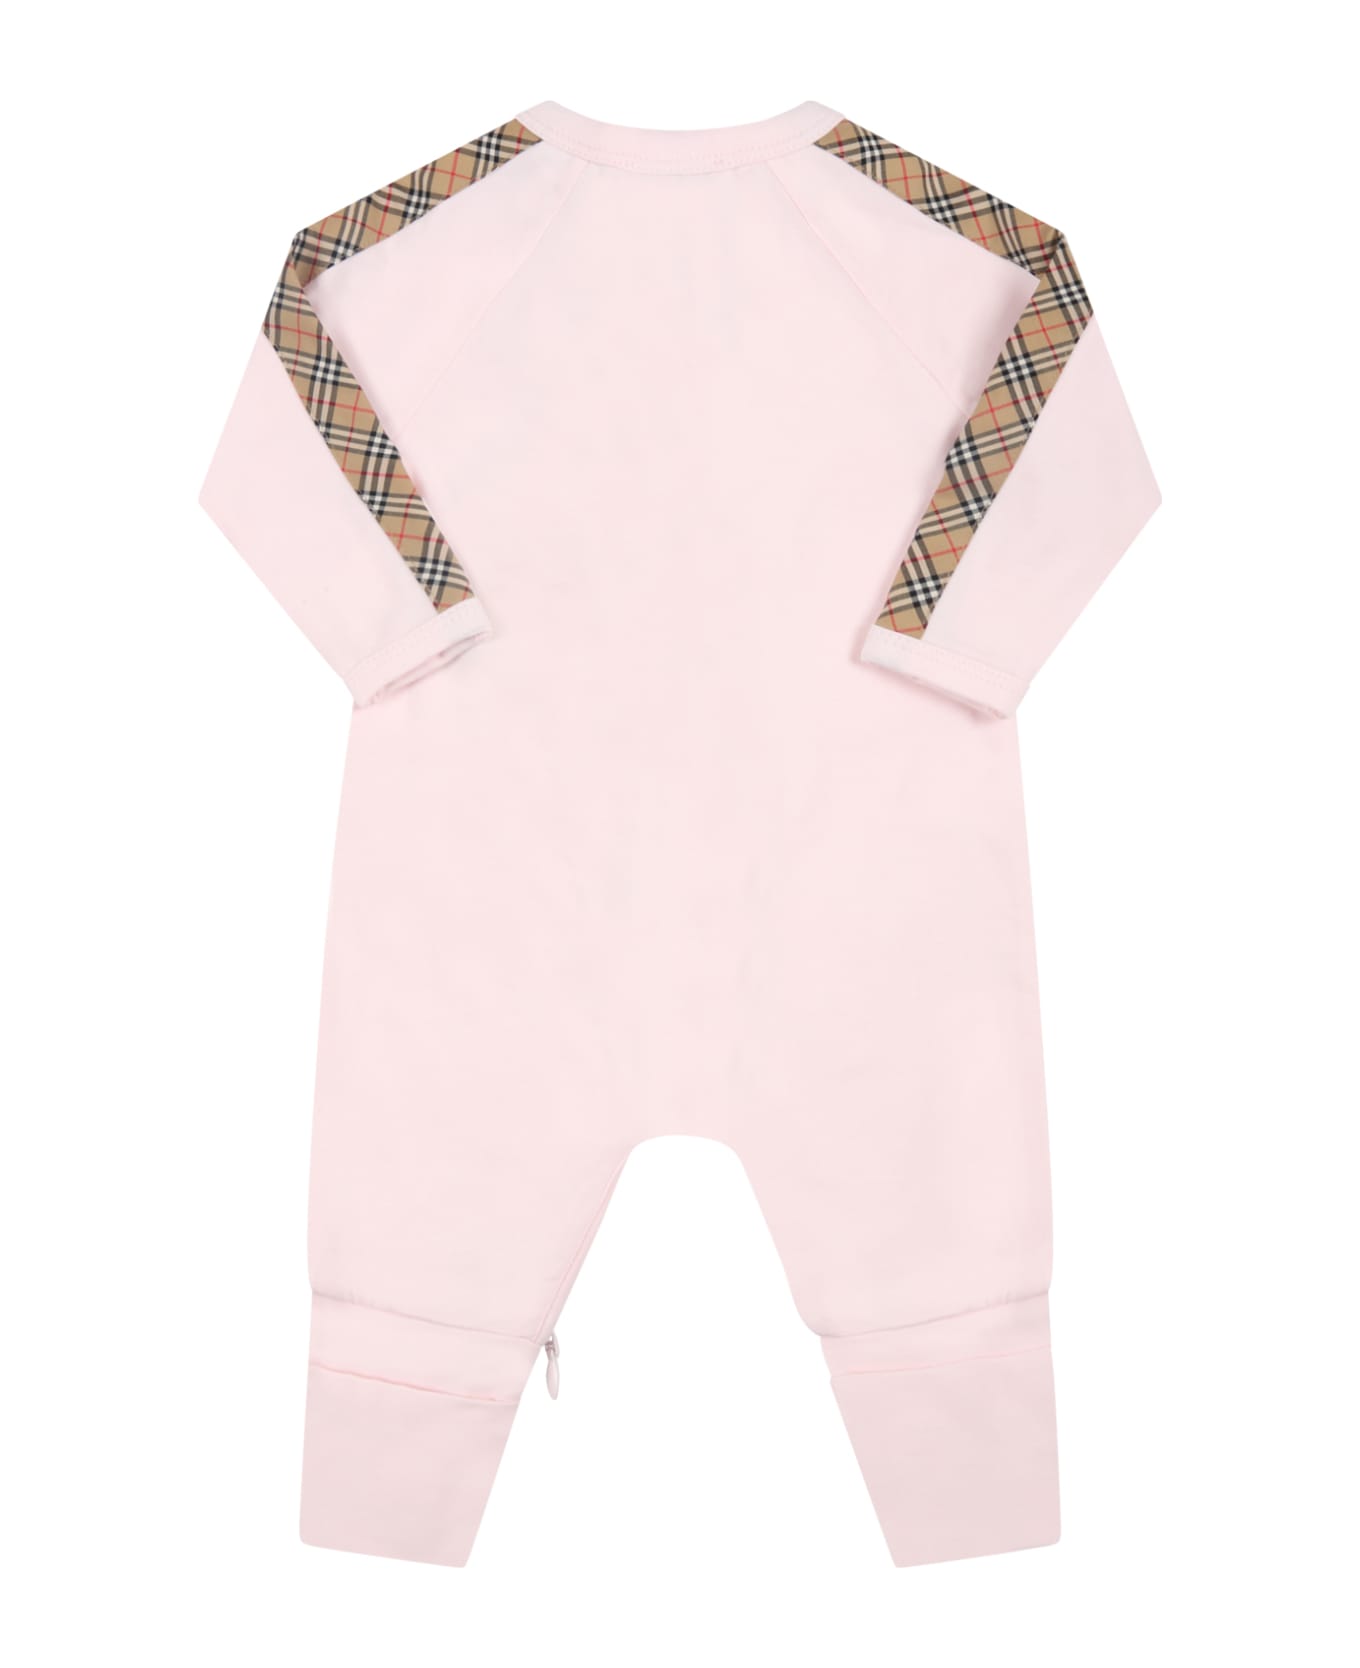 Burberry Pink Set For Baby Girl With Iconic Check Vintage - Pink